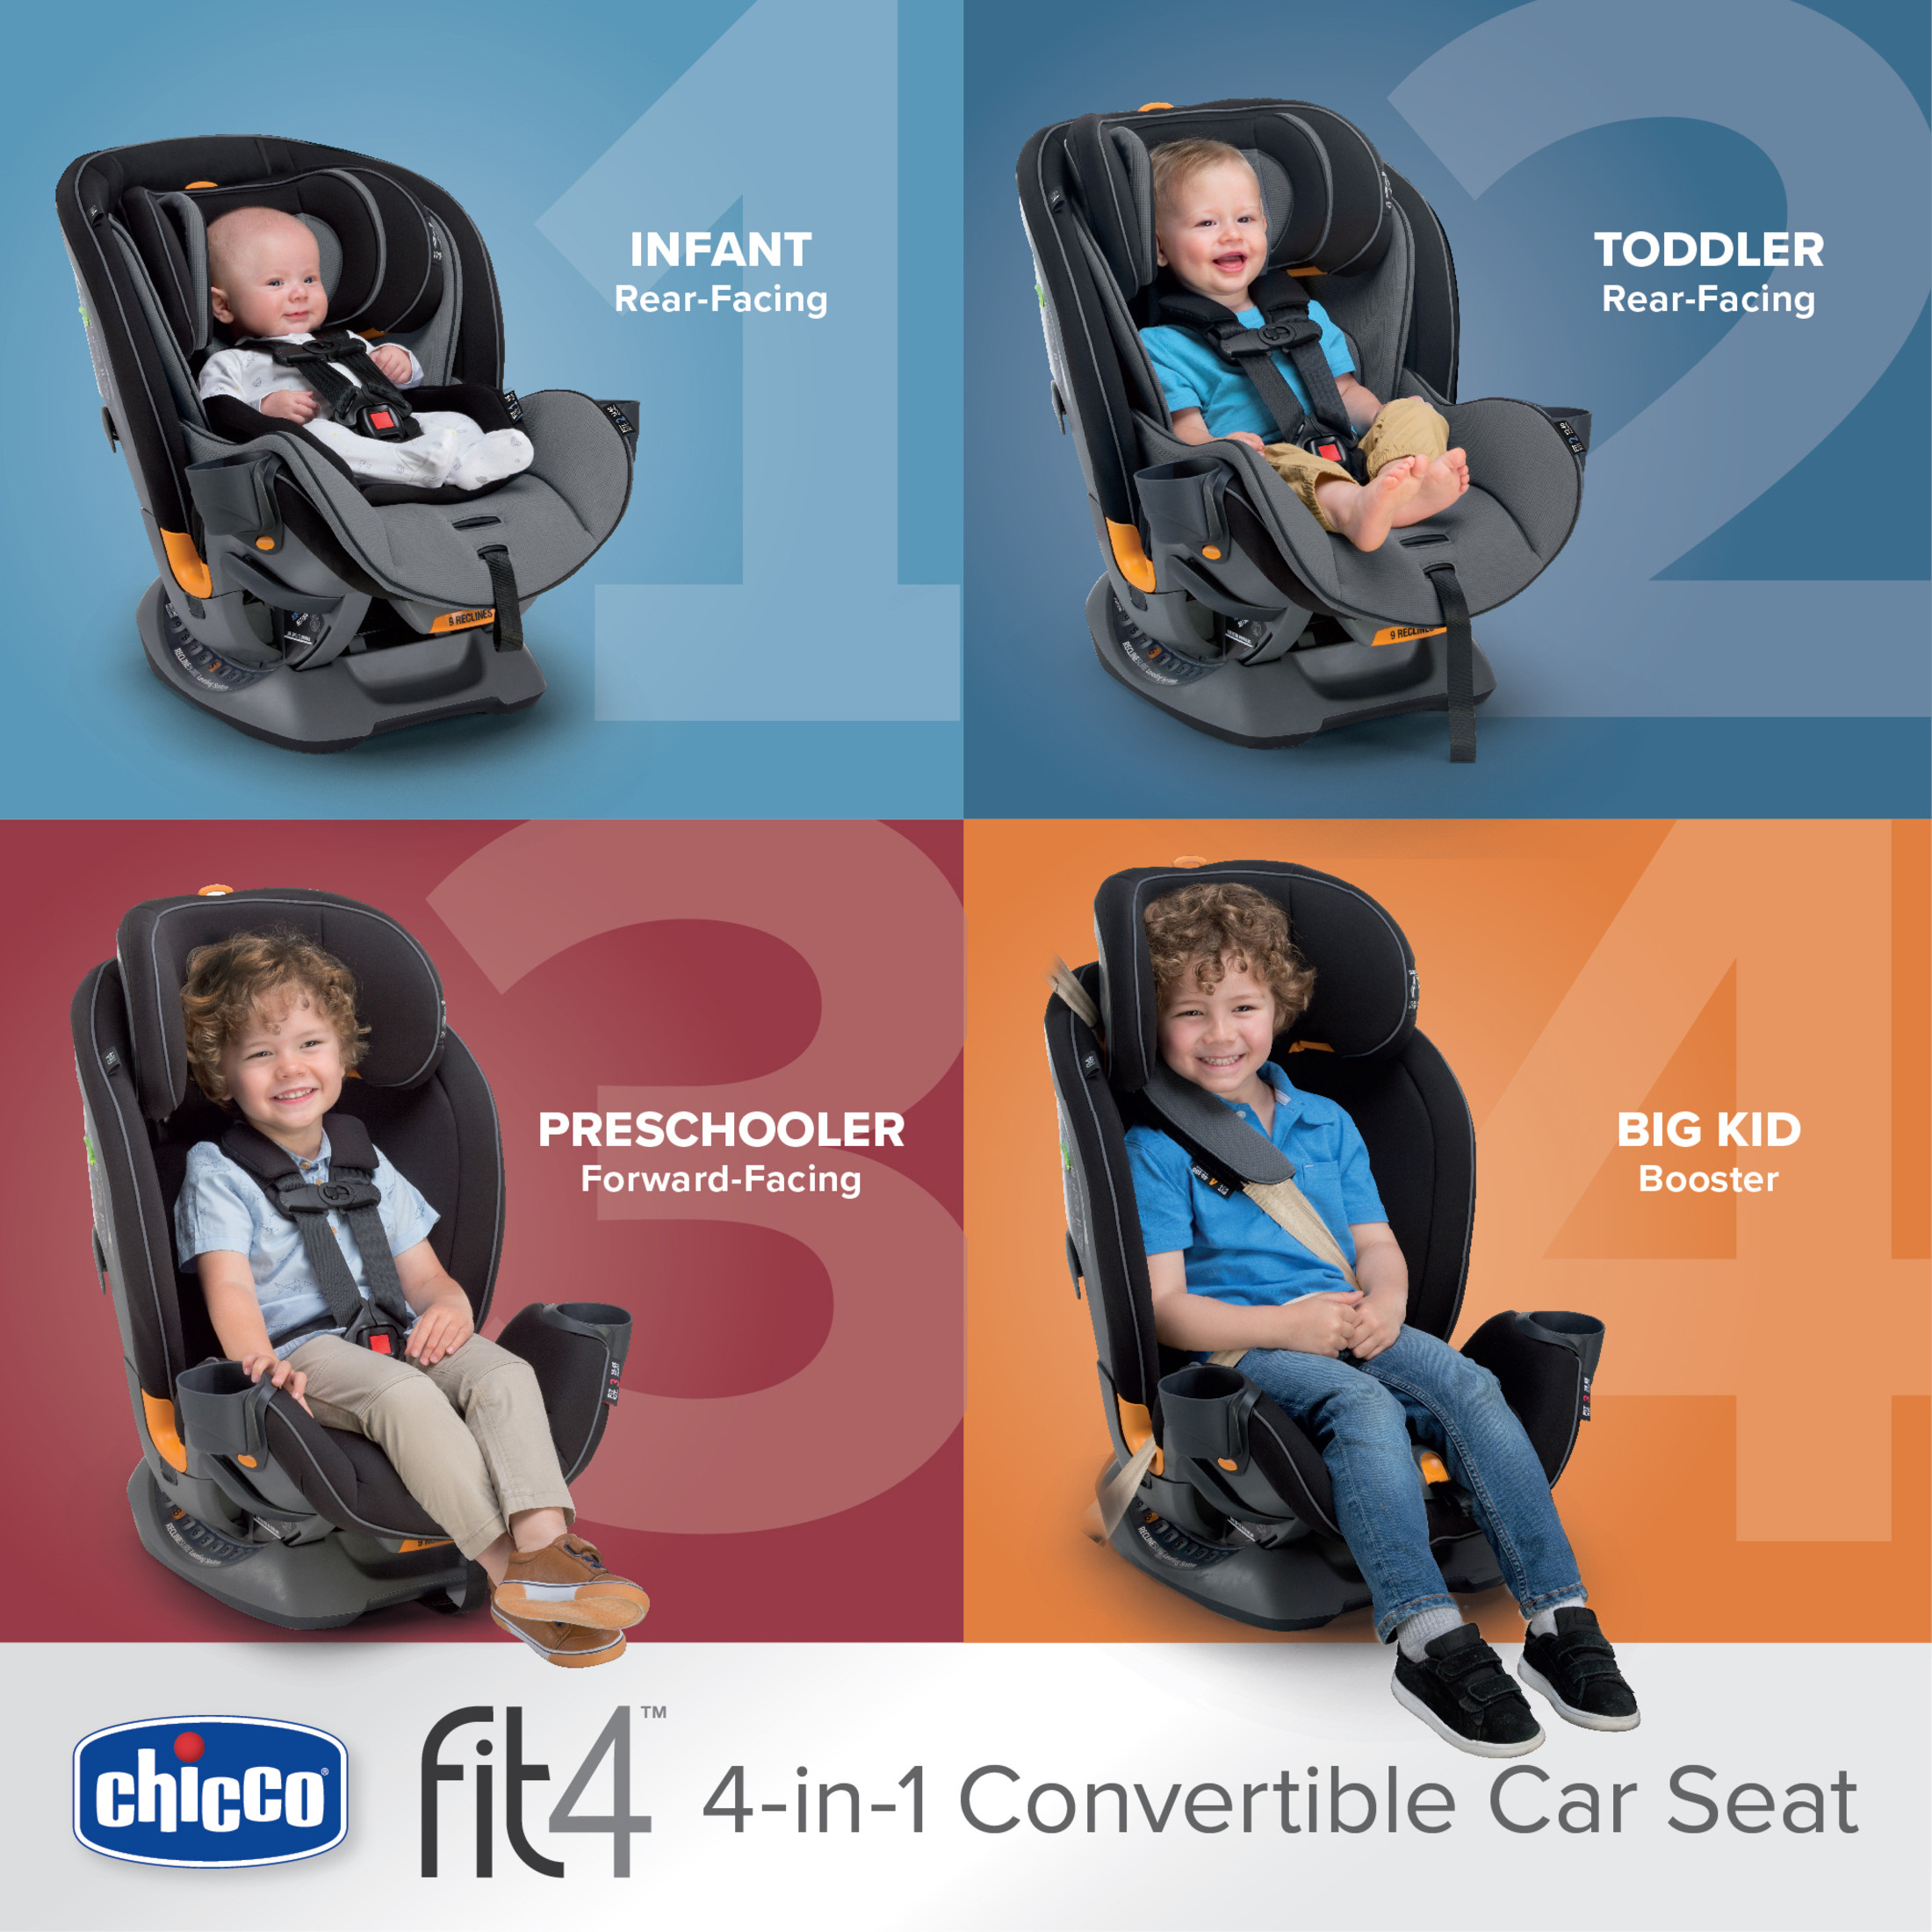 Chicco Fit4 4-in-1 Convertible Car Seat - Carina (Navy/Purple) - image 2 of 13